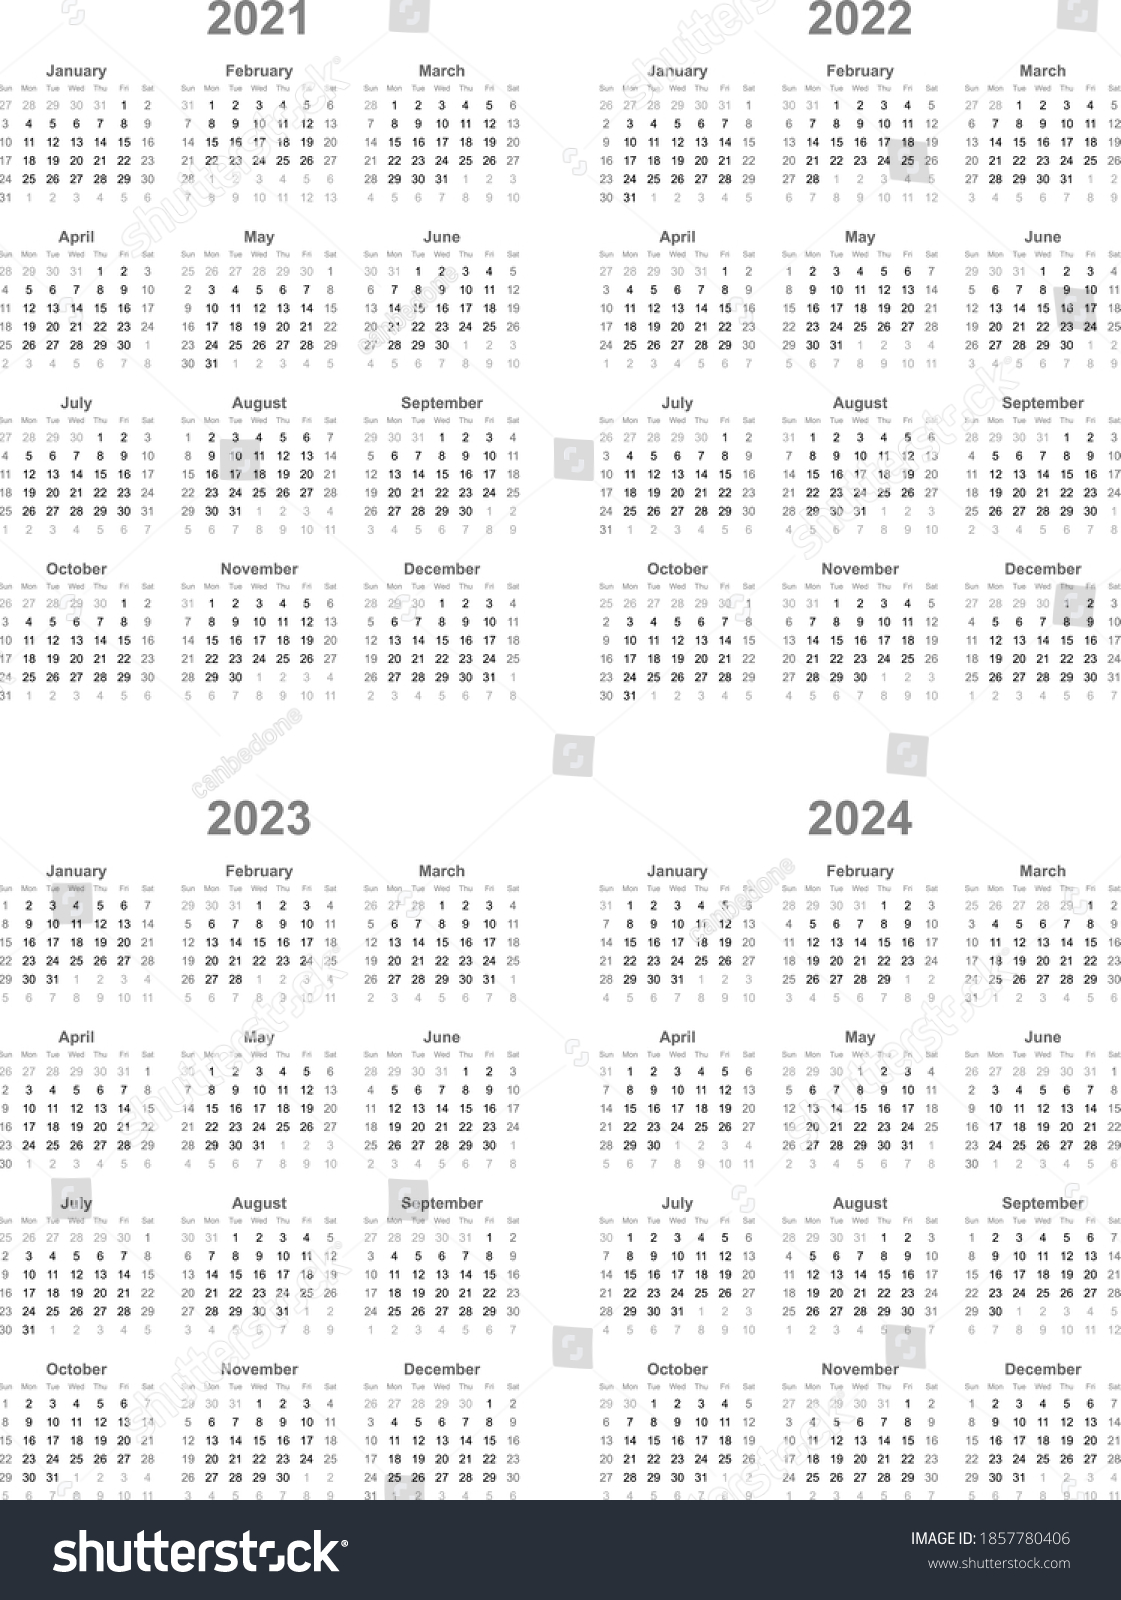 Simple calendar Layout 2021 2022 2023 2024 years - Royalty Free Stock ...